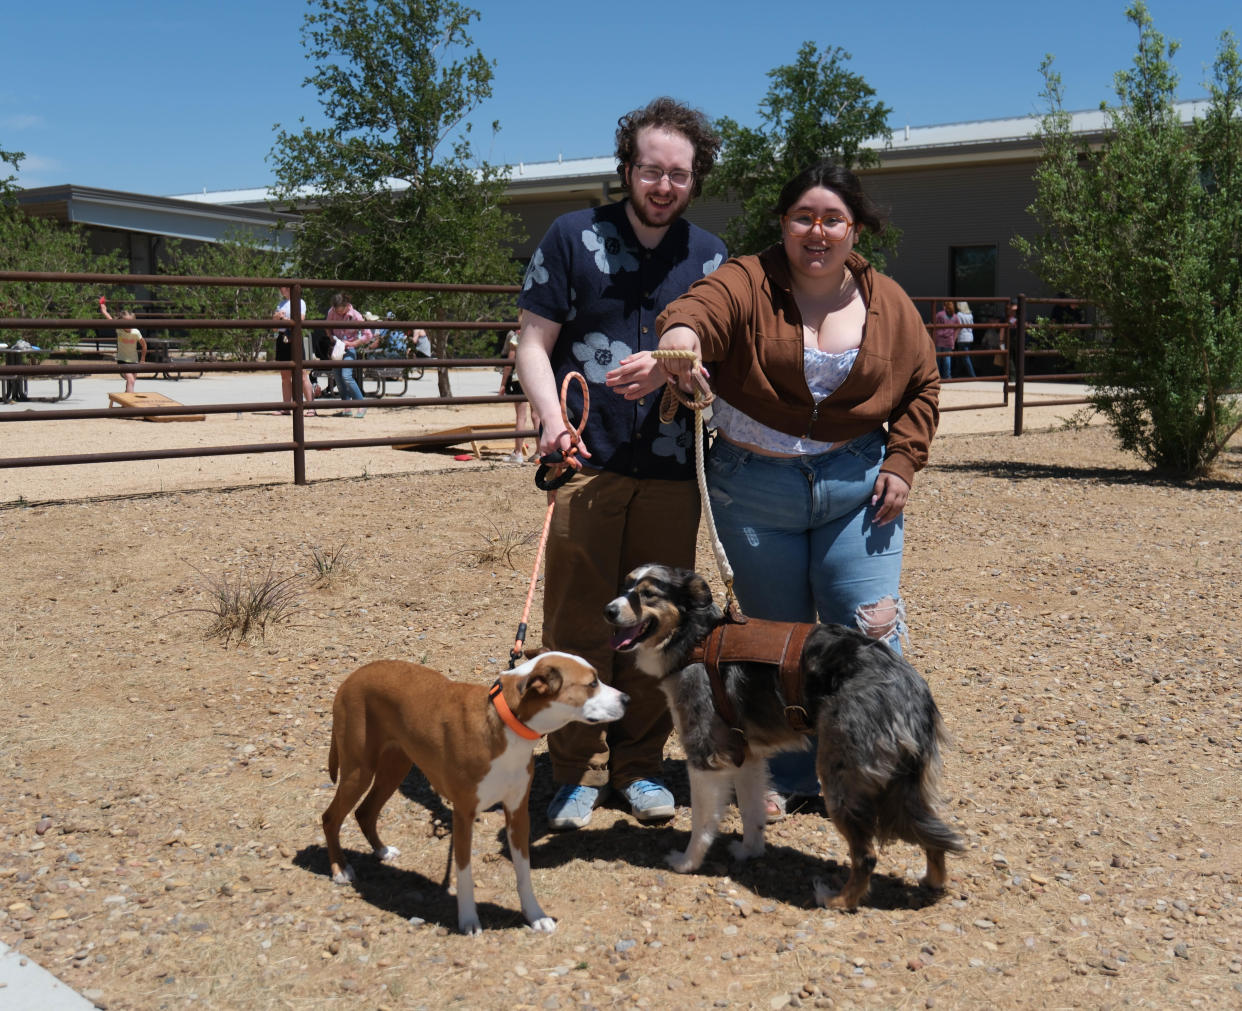 A couple with their dogs Sky and Jasper enjoy the day at the Texas Tech School of Veterinary Medicine "Barks and Recreation" event Saturday at Mariposa Station in west Amarillo.